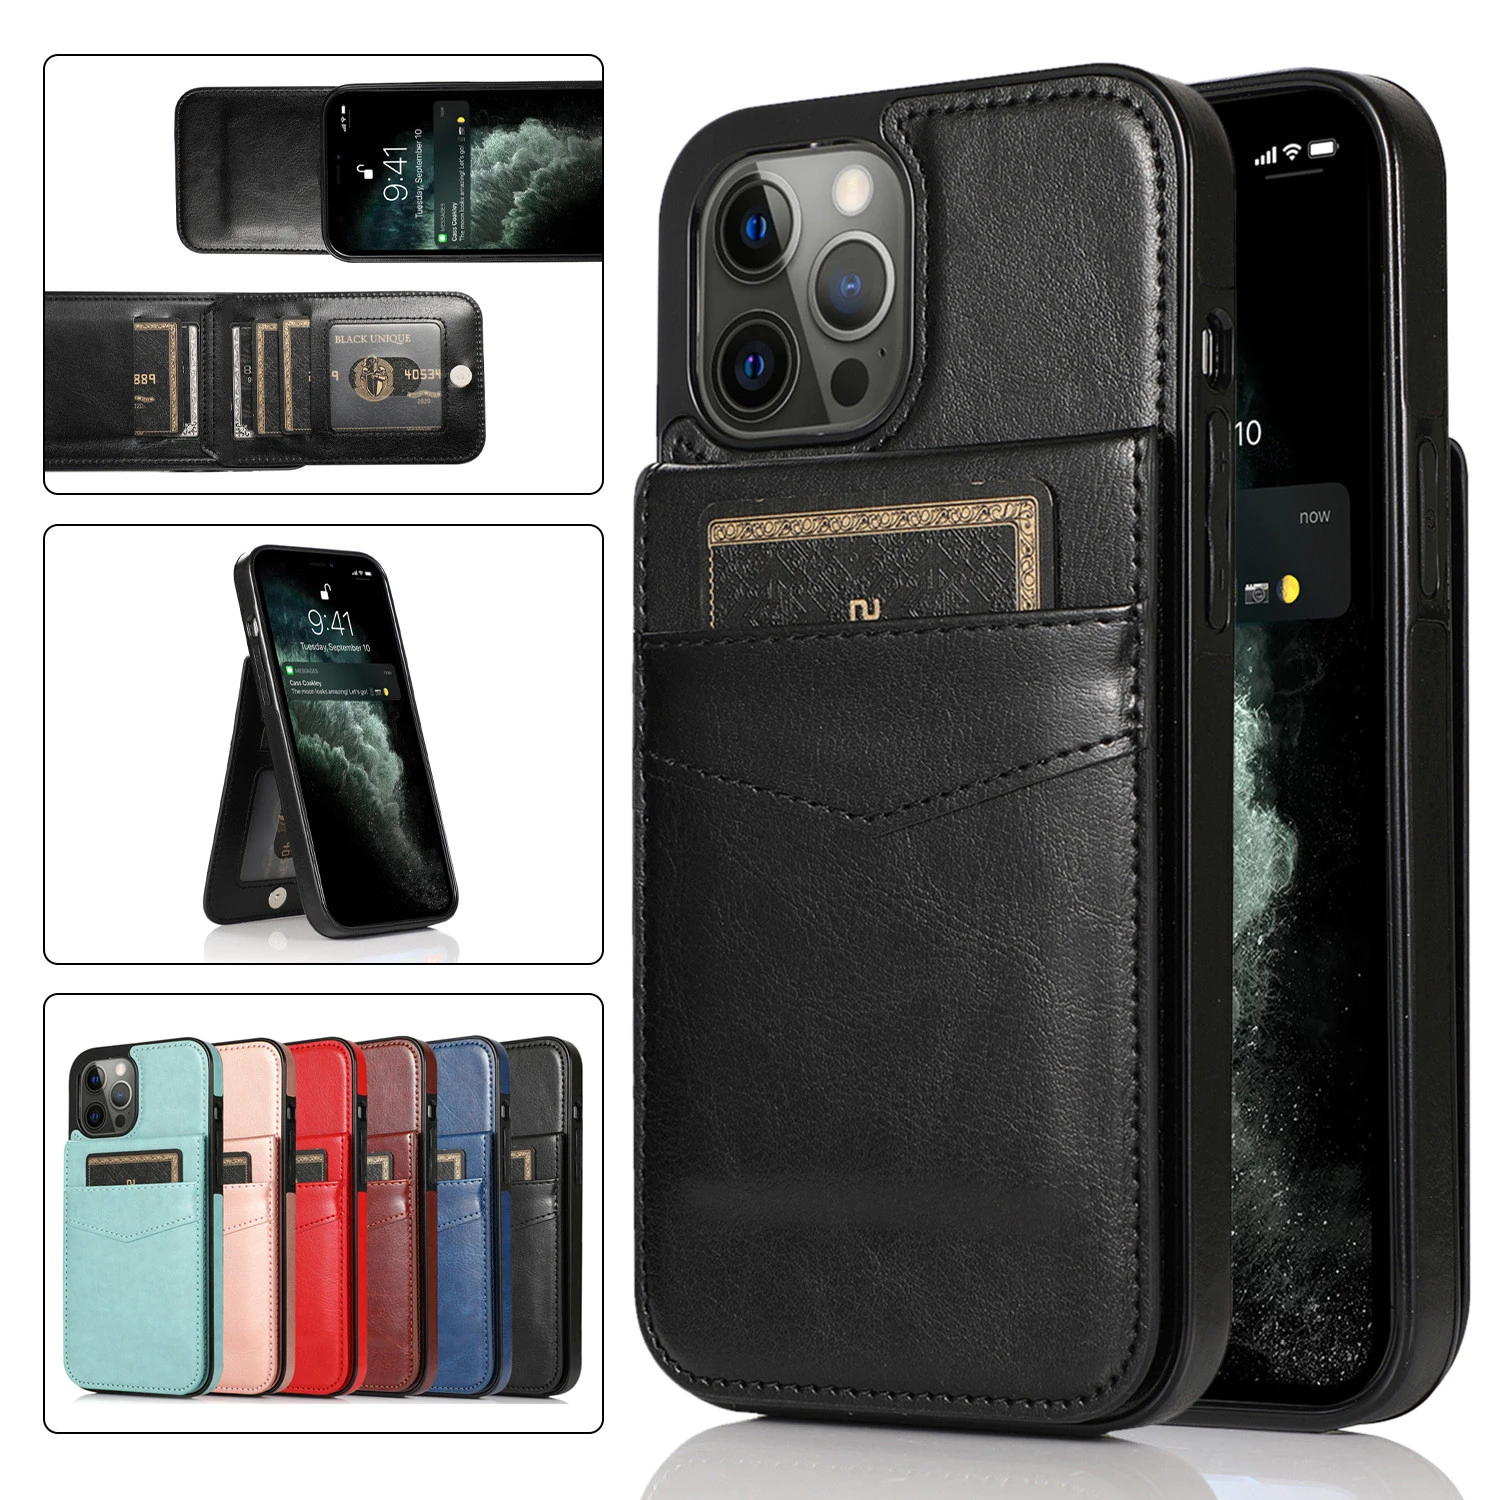 Luxury Case for iPhone SE 2020 11 12 13 Mini Pro X XS Max 6 6s 7 8 Plus XR Wallet Cover with Cards Holder Leather Phone Bags 13 pro max case